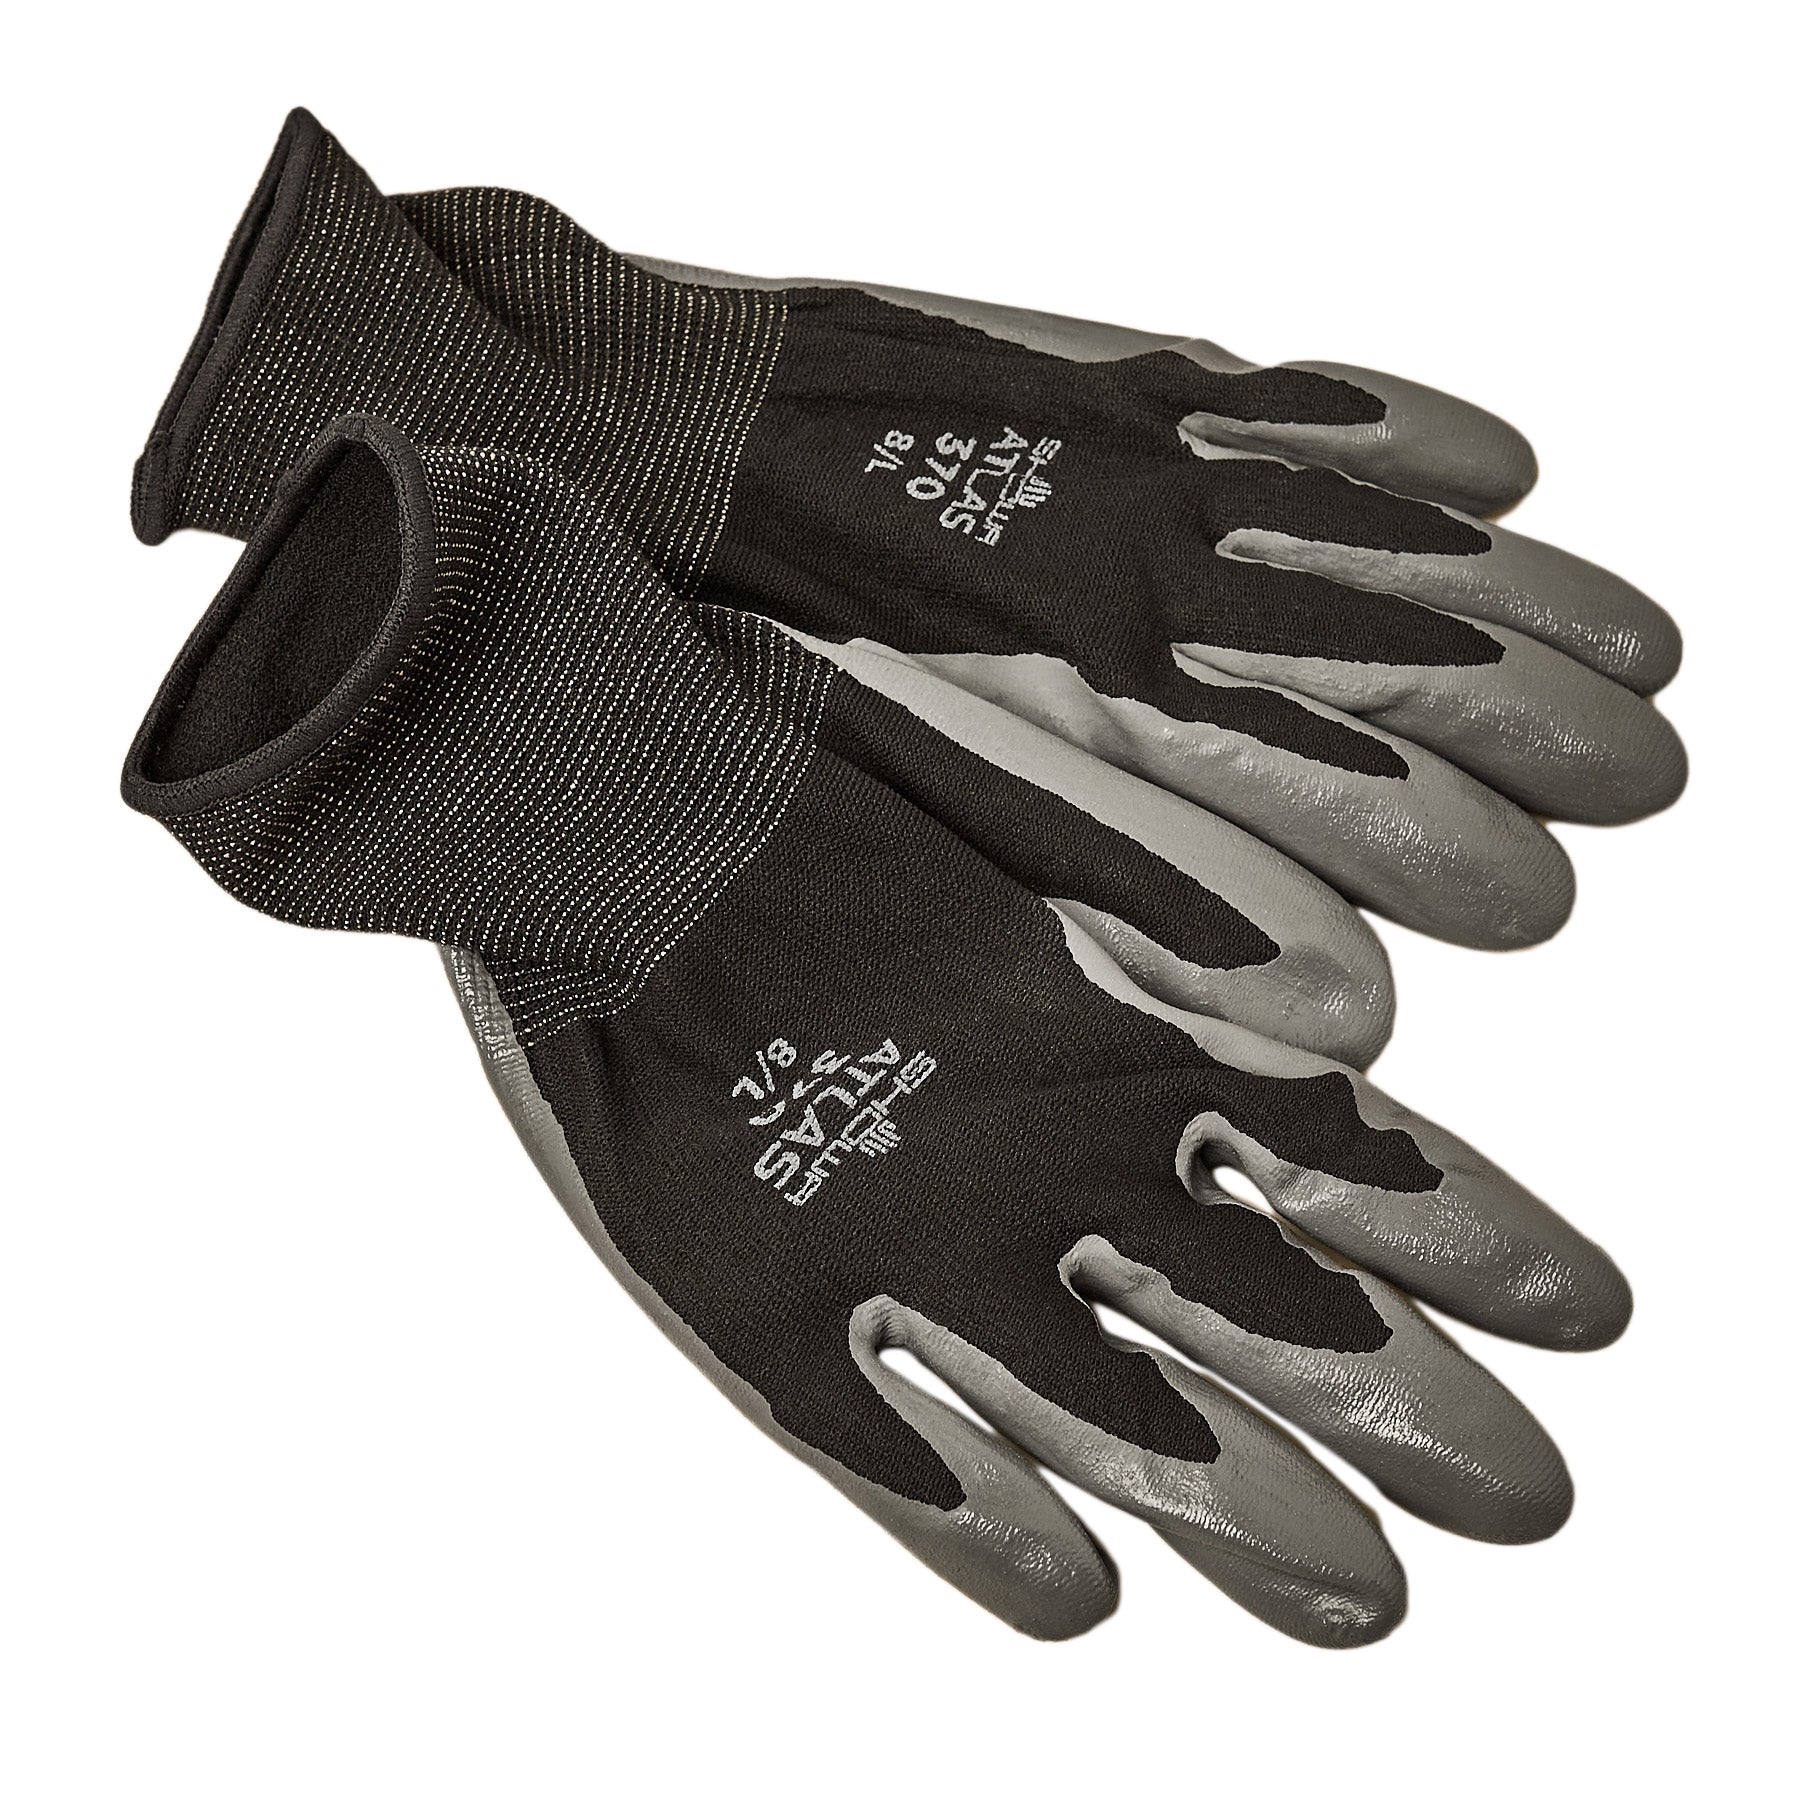 A pair of black and grey work gloves on a white background.